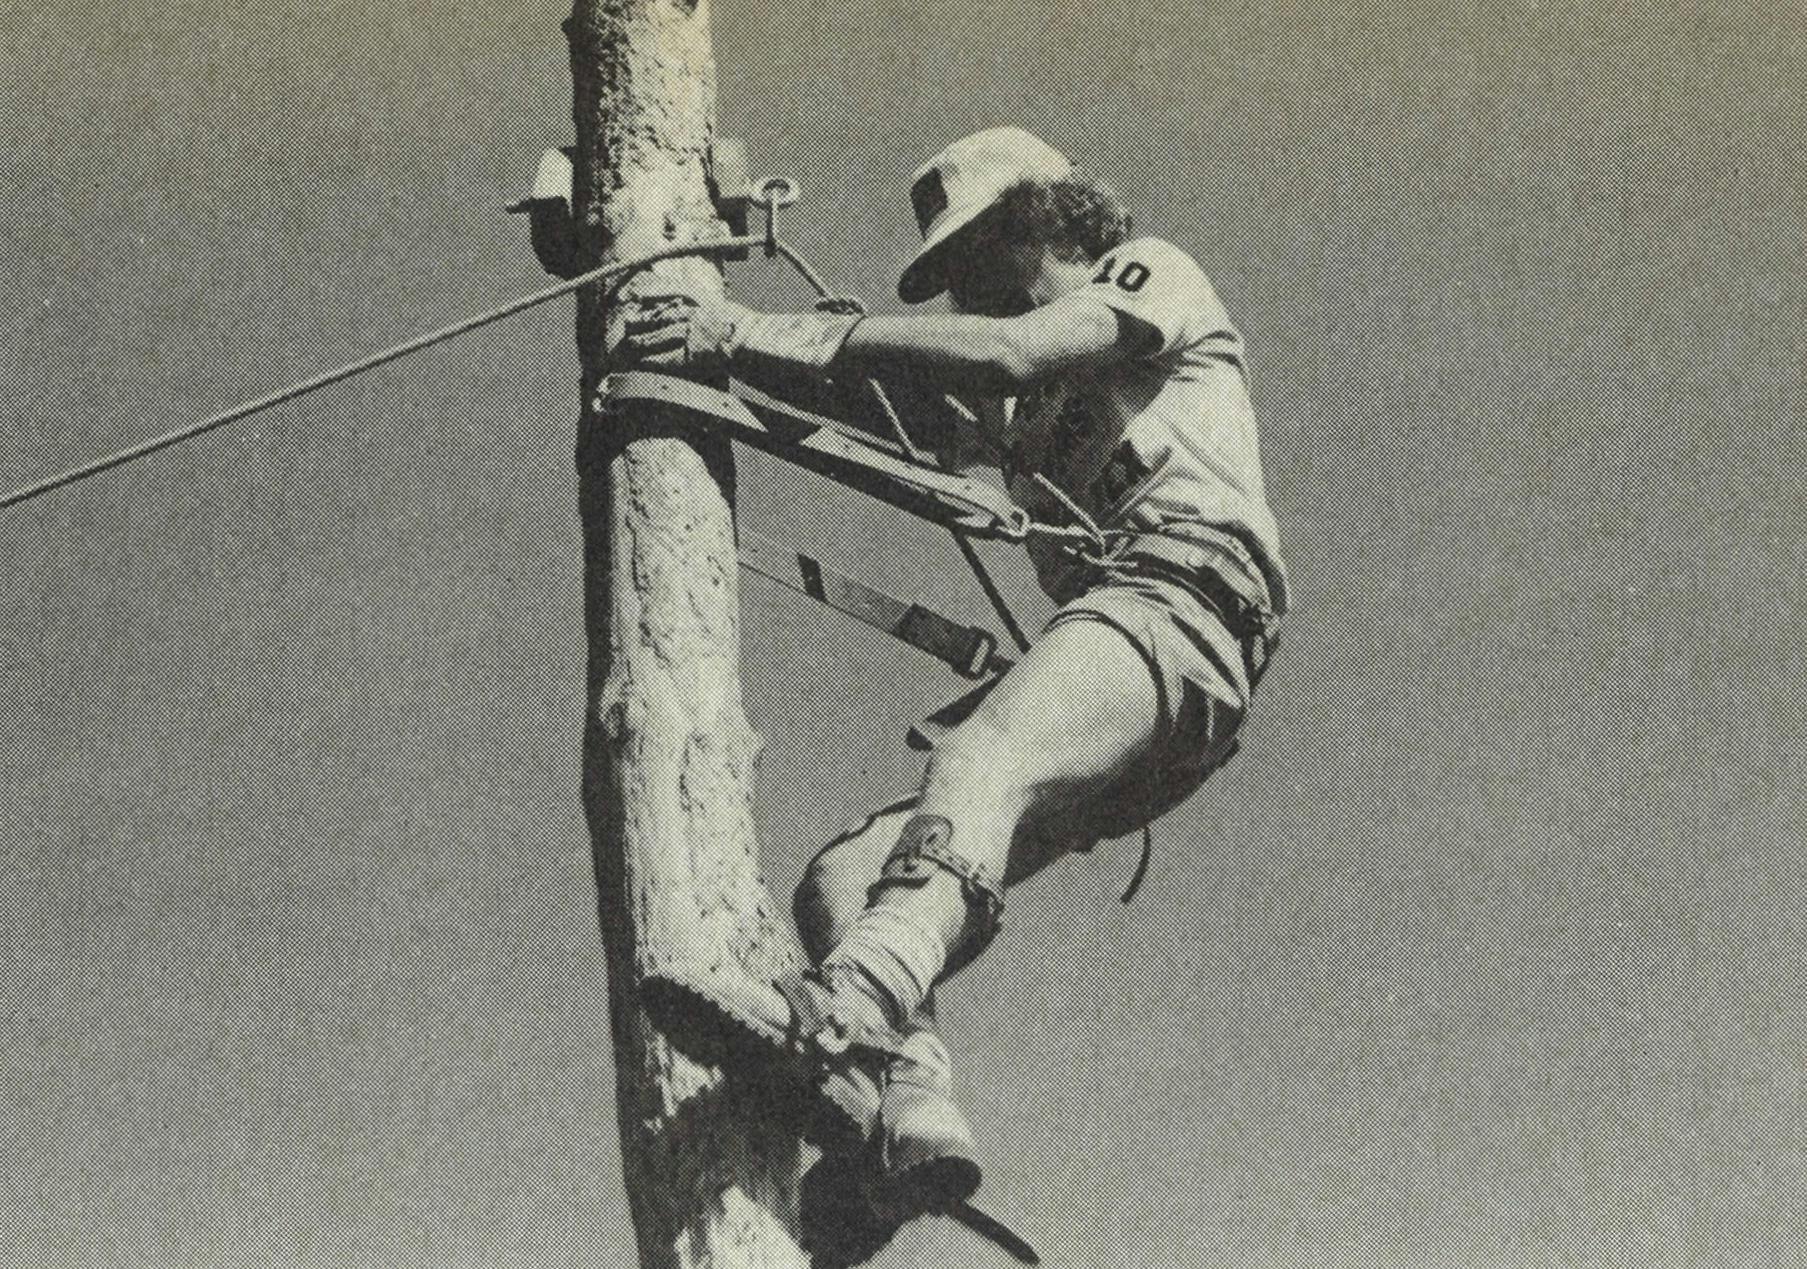 At Philmont, scouts learn such necessary skills as how to scale a denuded tree trunk.